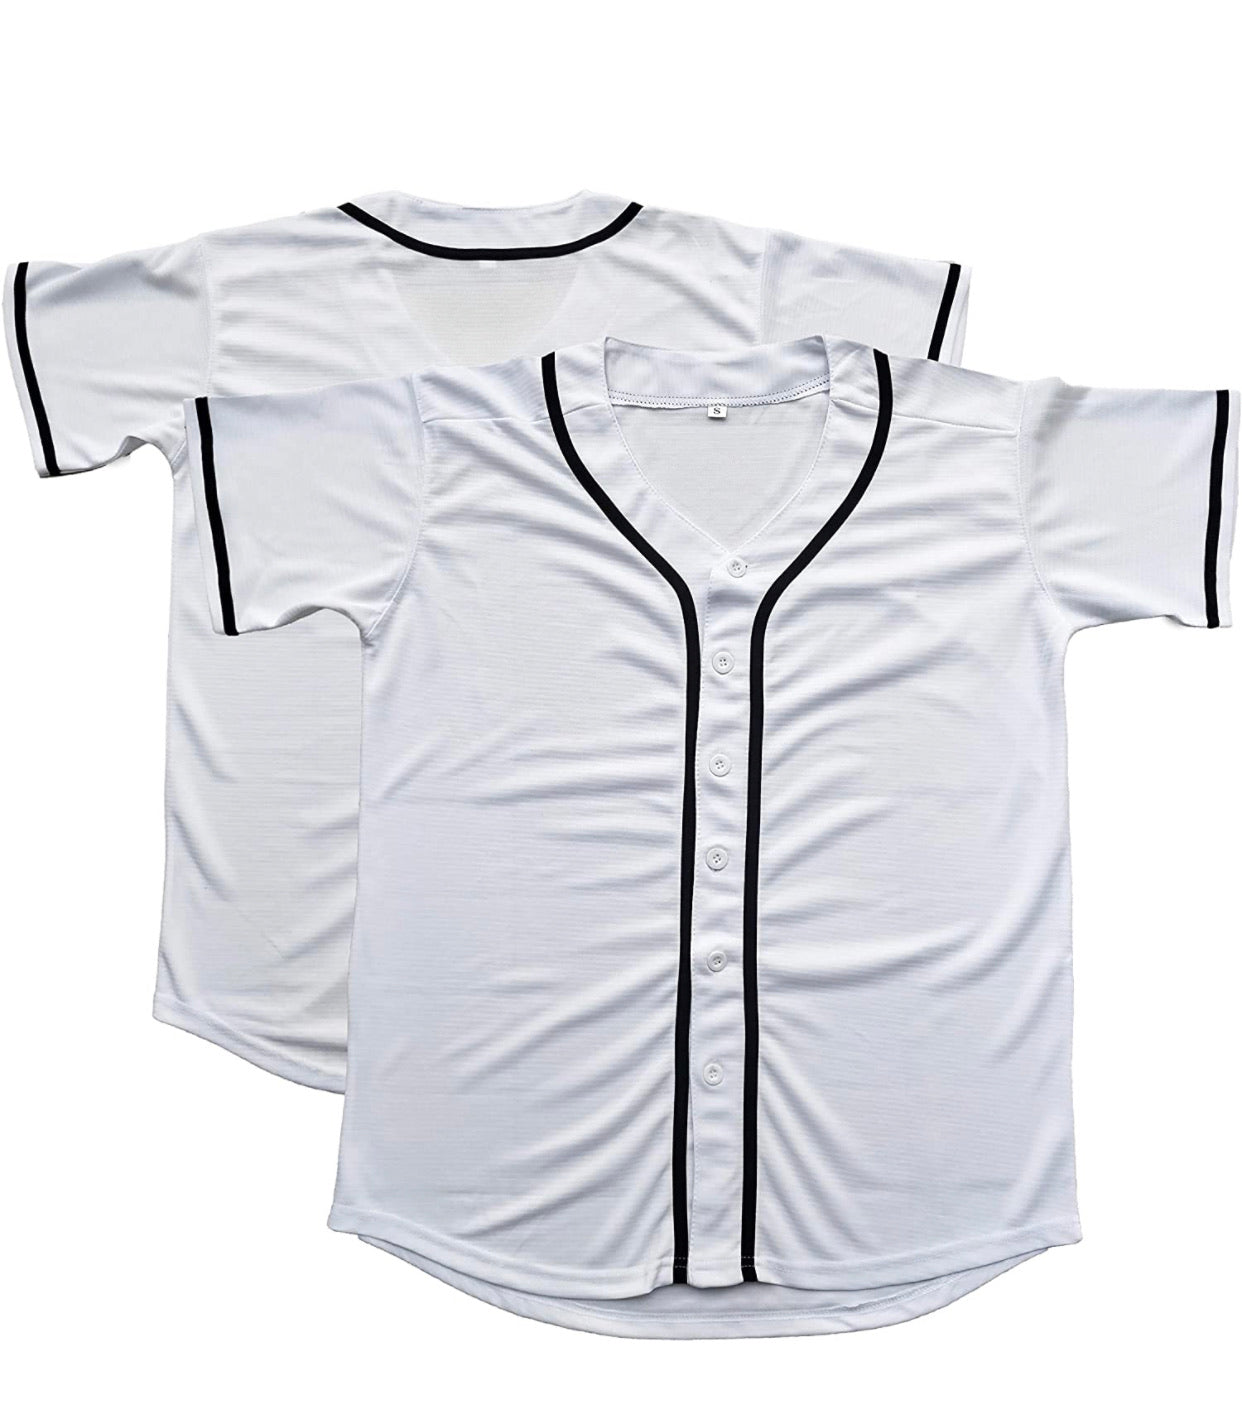 We Sub’N ™️ Sublimation baseball jersey(mesh) WITH BLACK PIPING